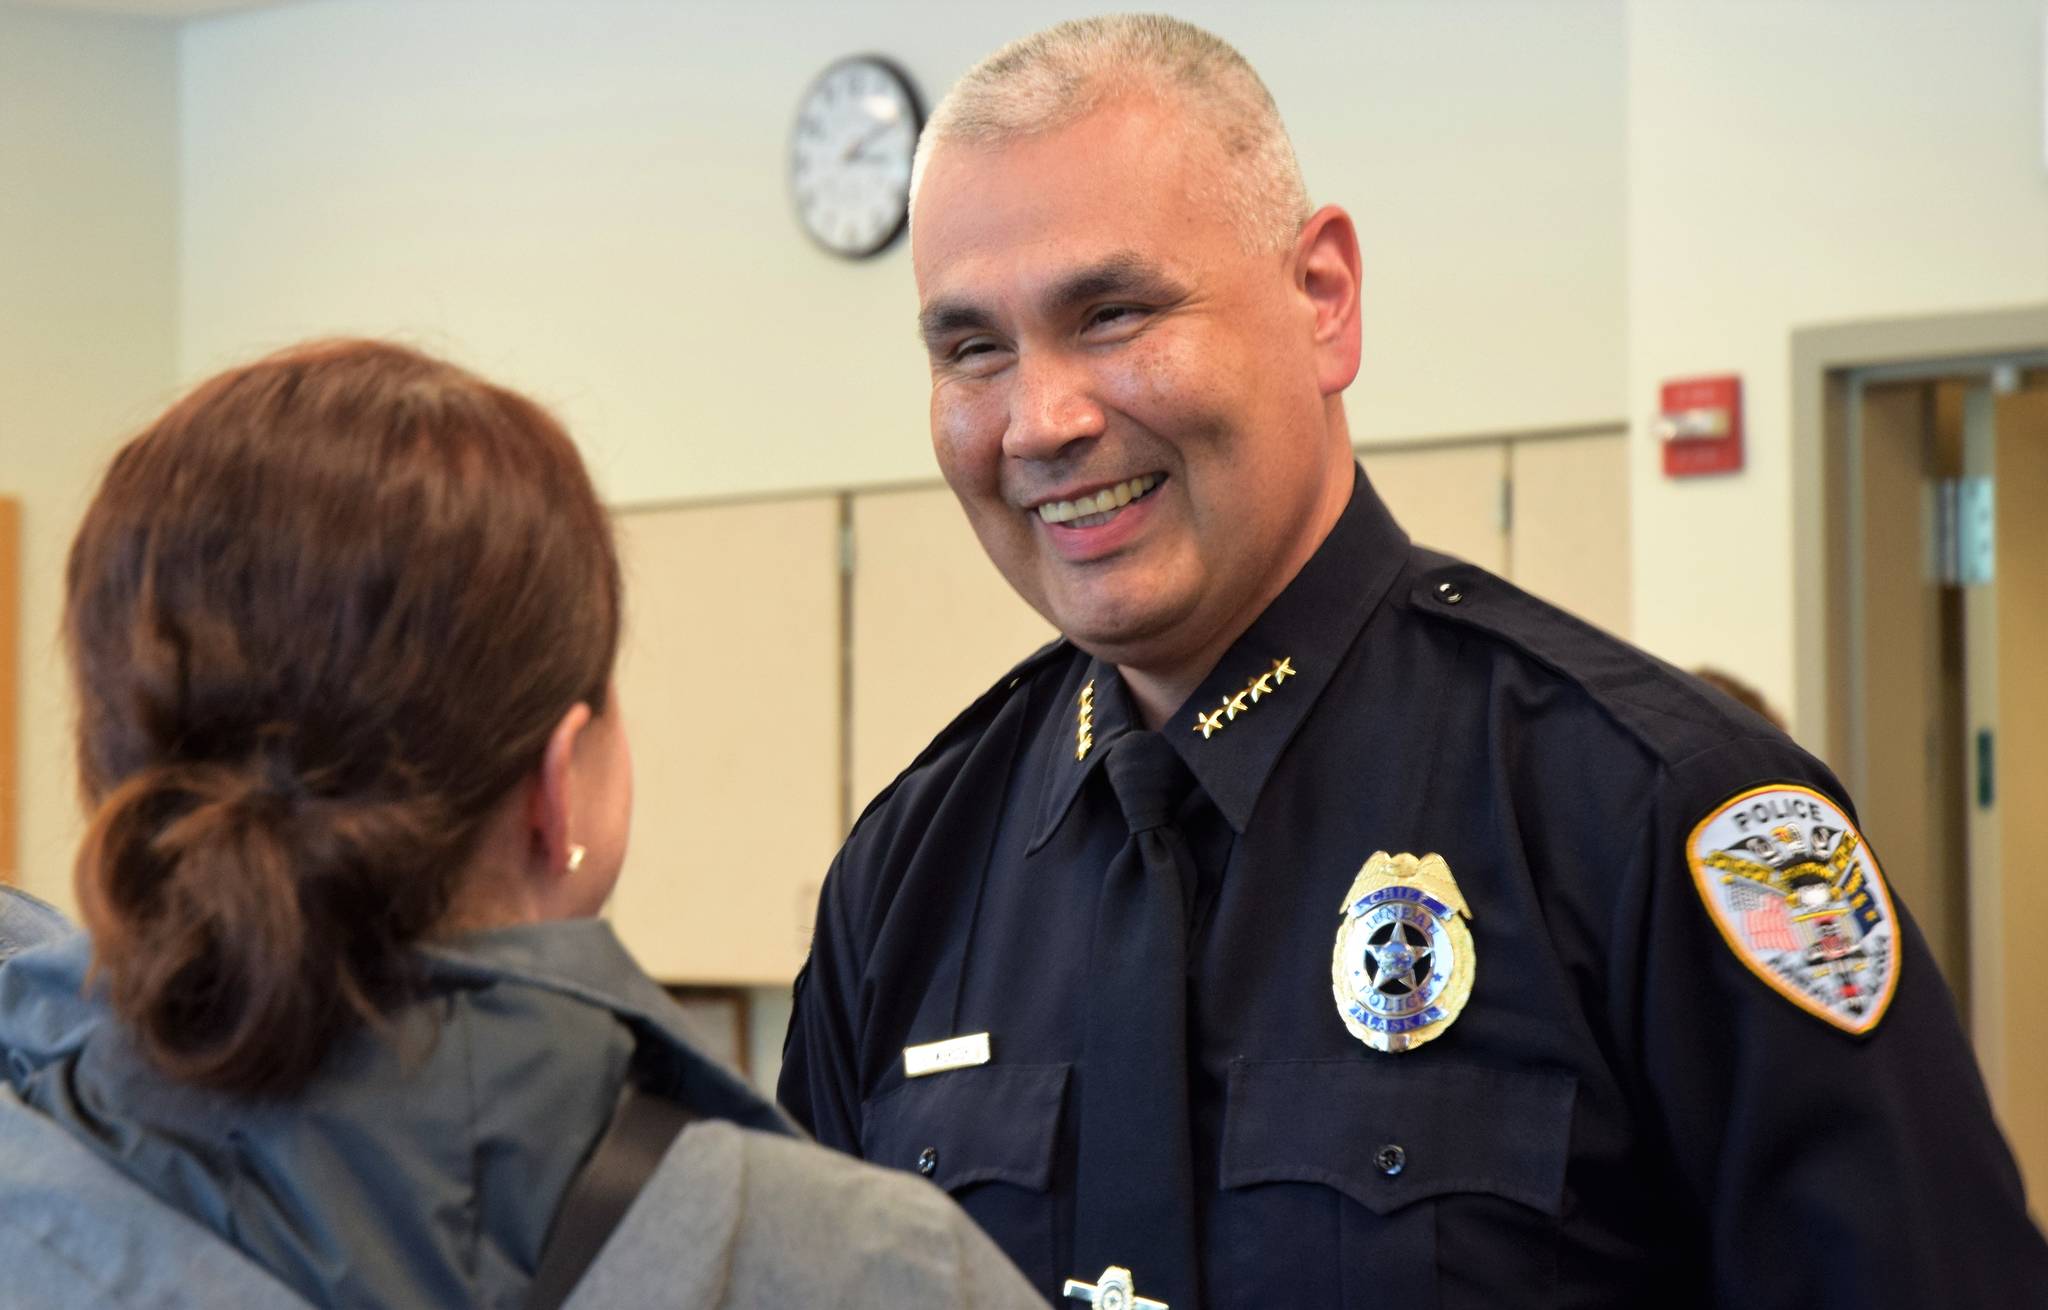 Juneau Police Department Chief Ed Mercer is all smiles while being congratulated by District Attorney Angie Kemp after his swearing-in Monday. (Liz Kellar | Juneau Empire)